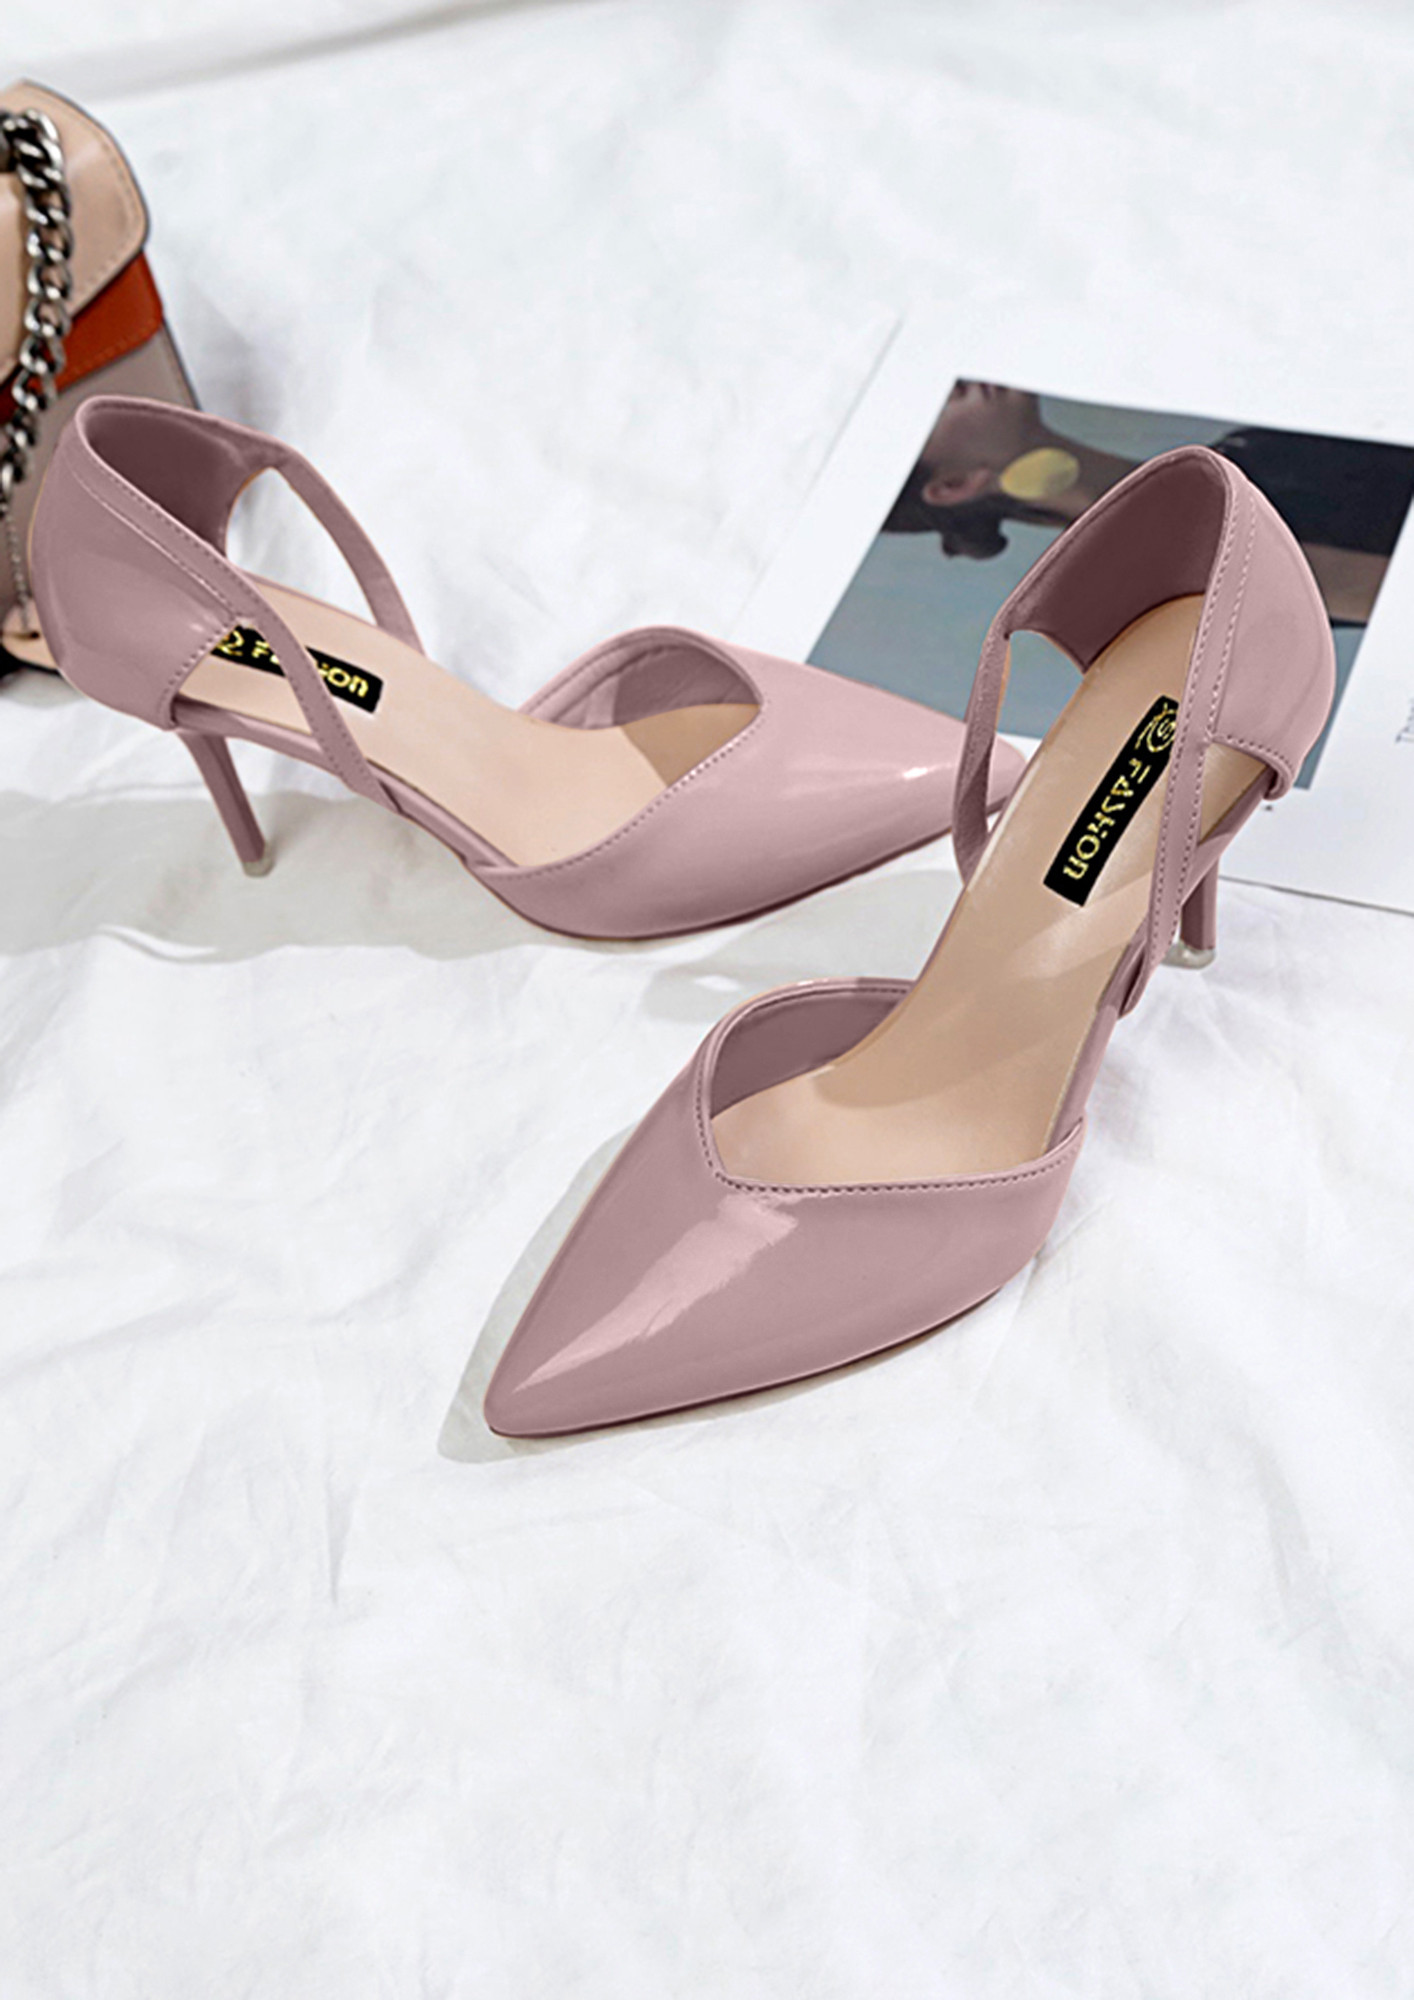 GET TO THE POINTY PINK PUMPS